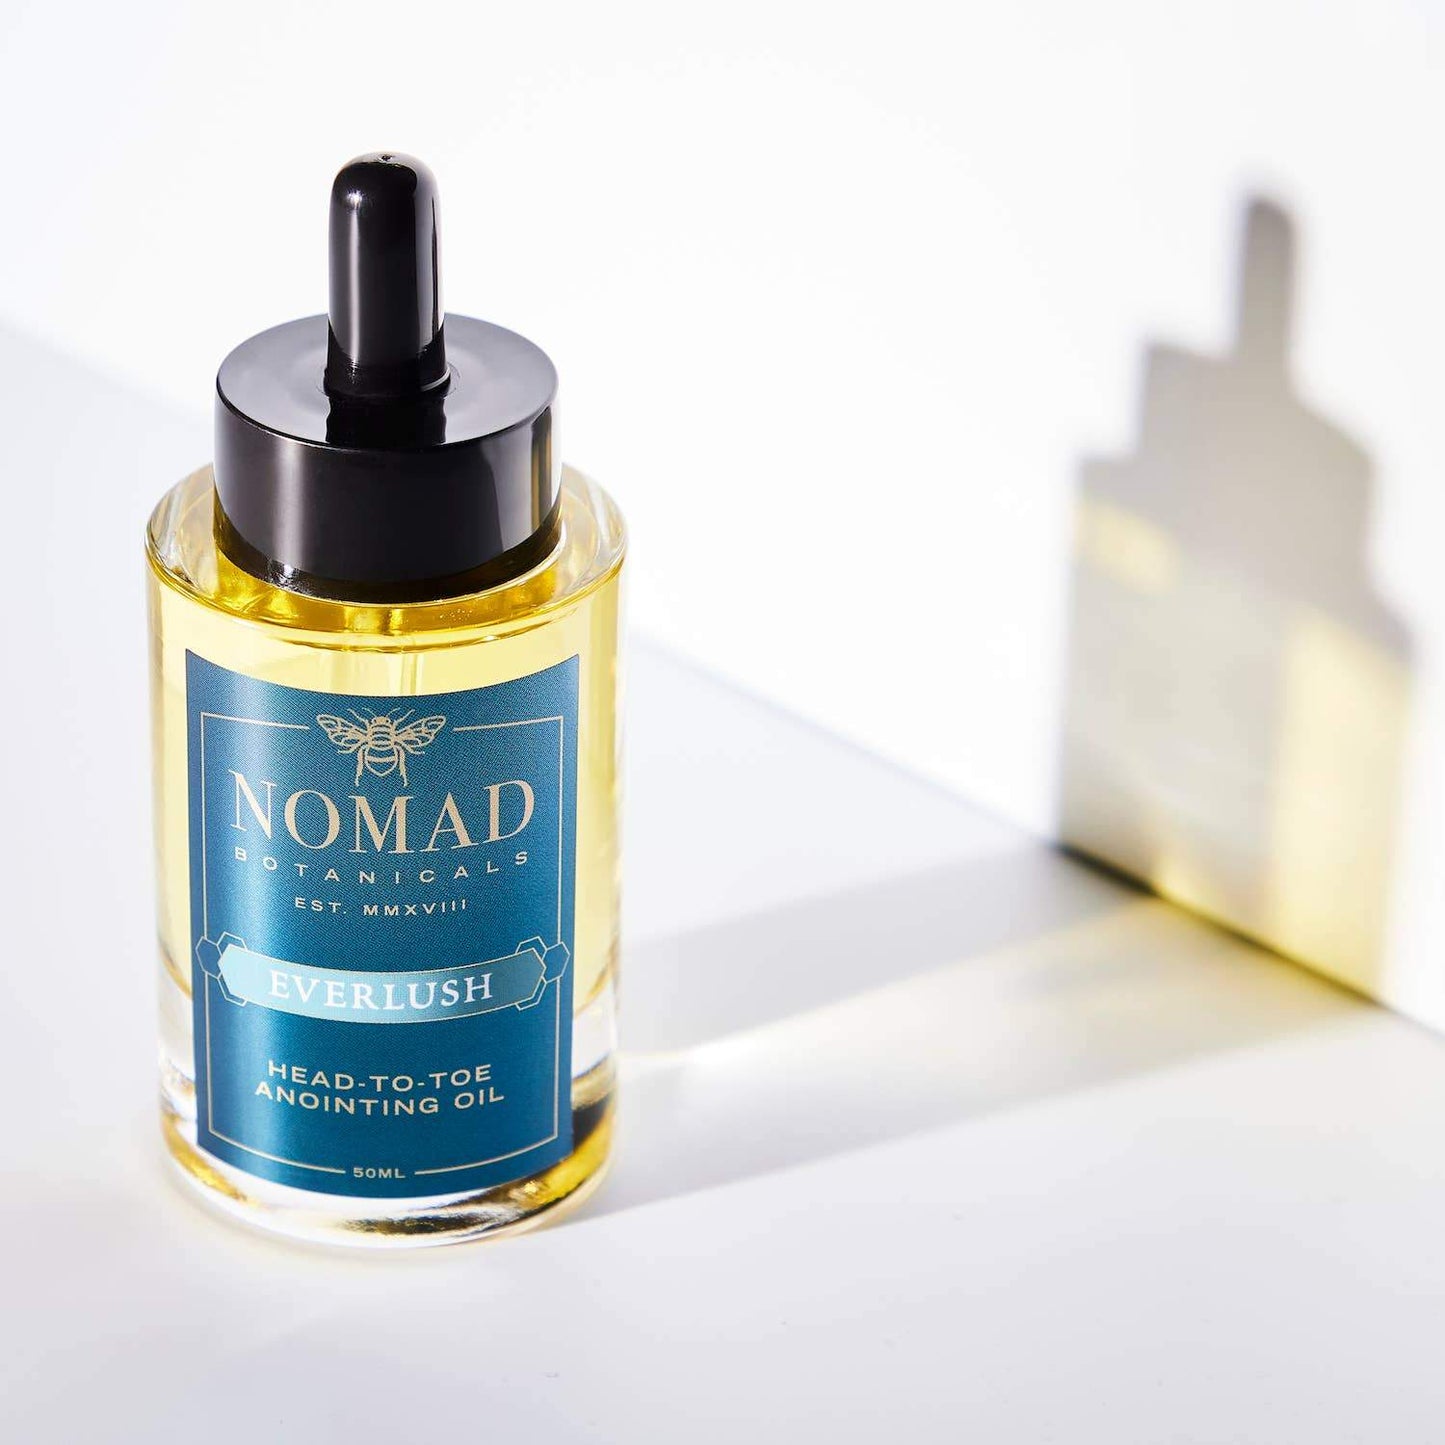 Everlush Head-to-Toe Anointing Oil-Nomad Botanicals